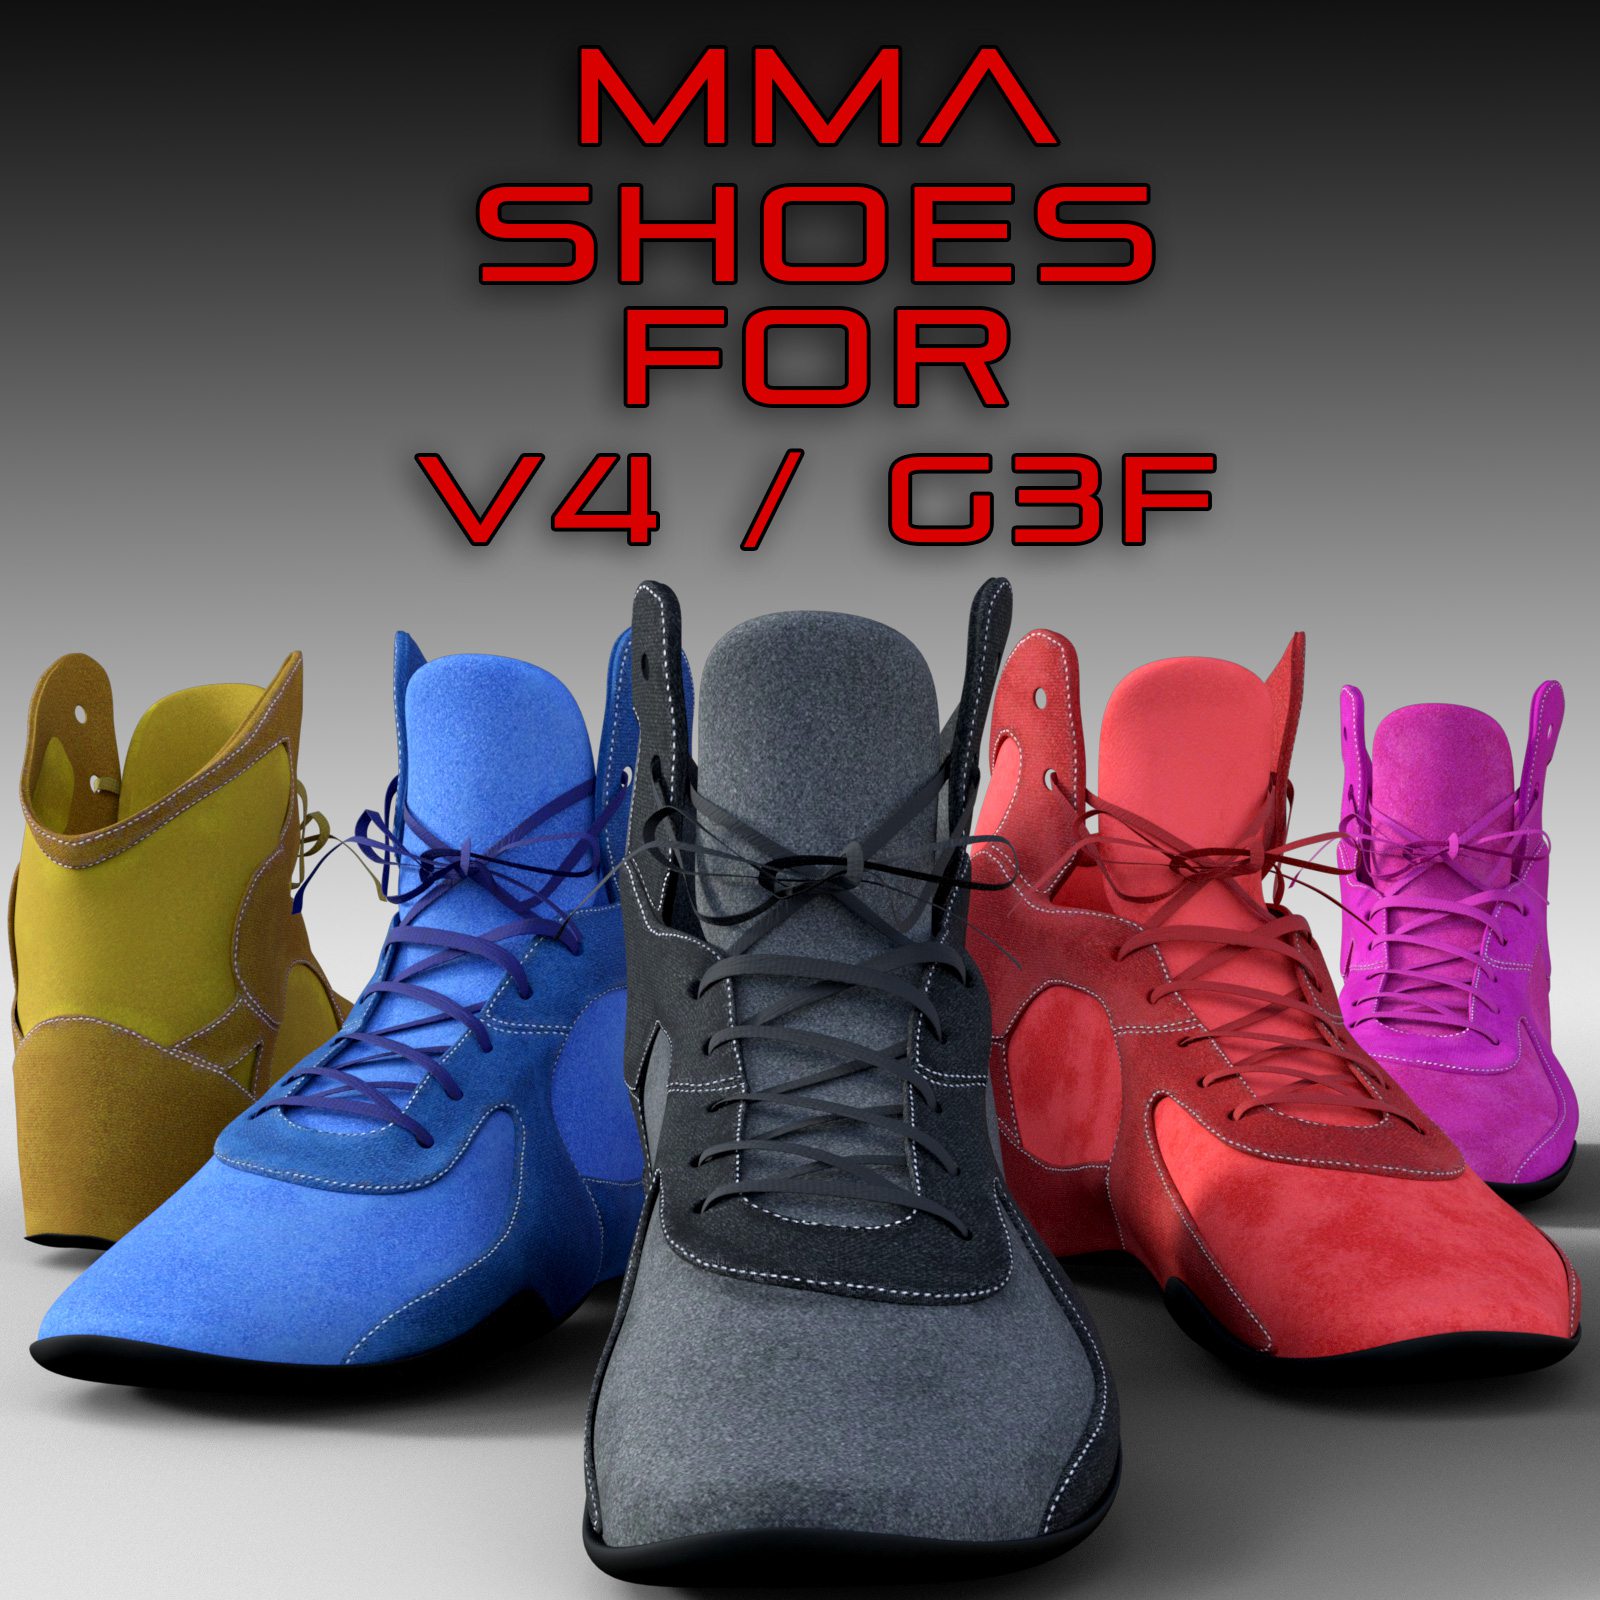 MMA Shoes for Genesis 3 Females and Victoria 4_DAZ3D下载站